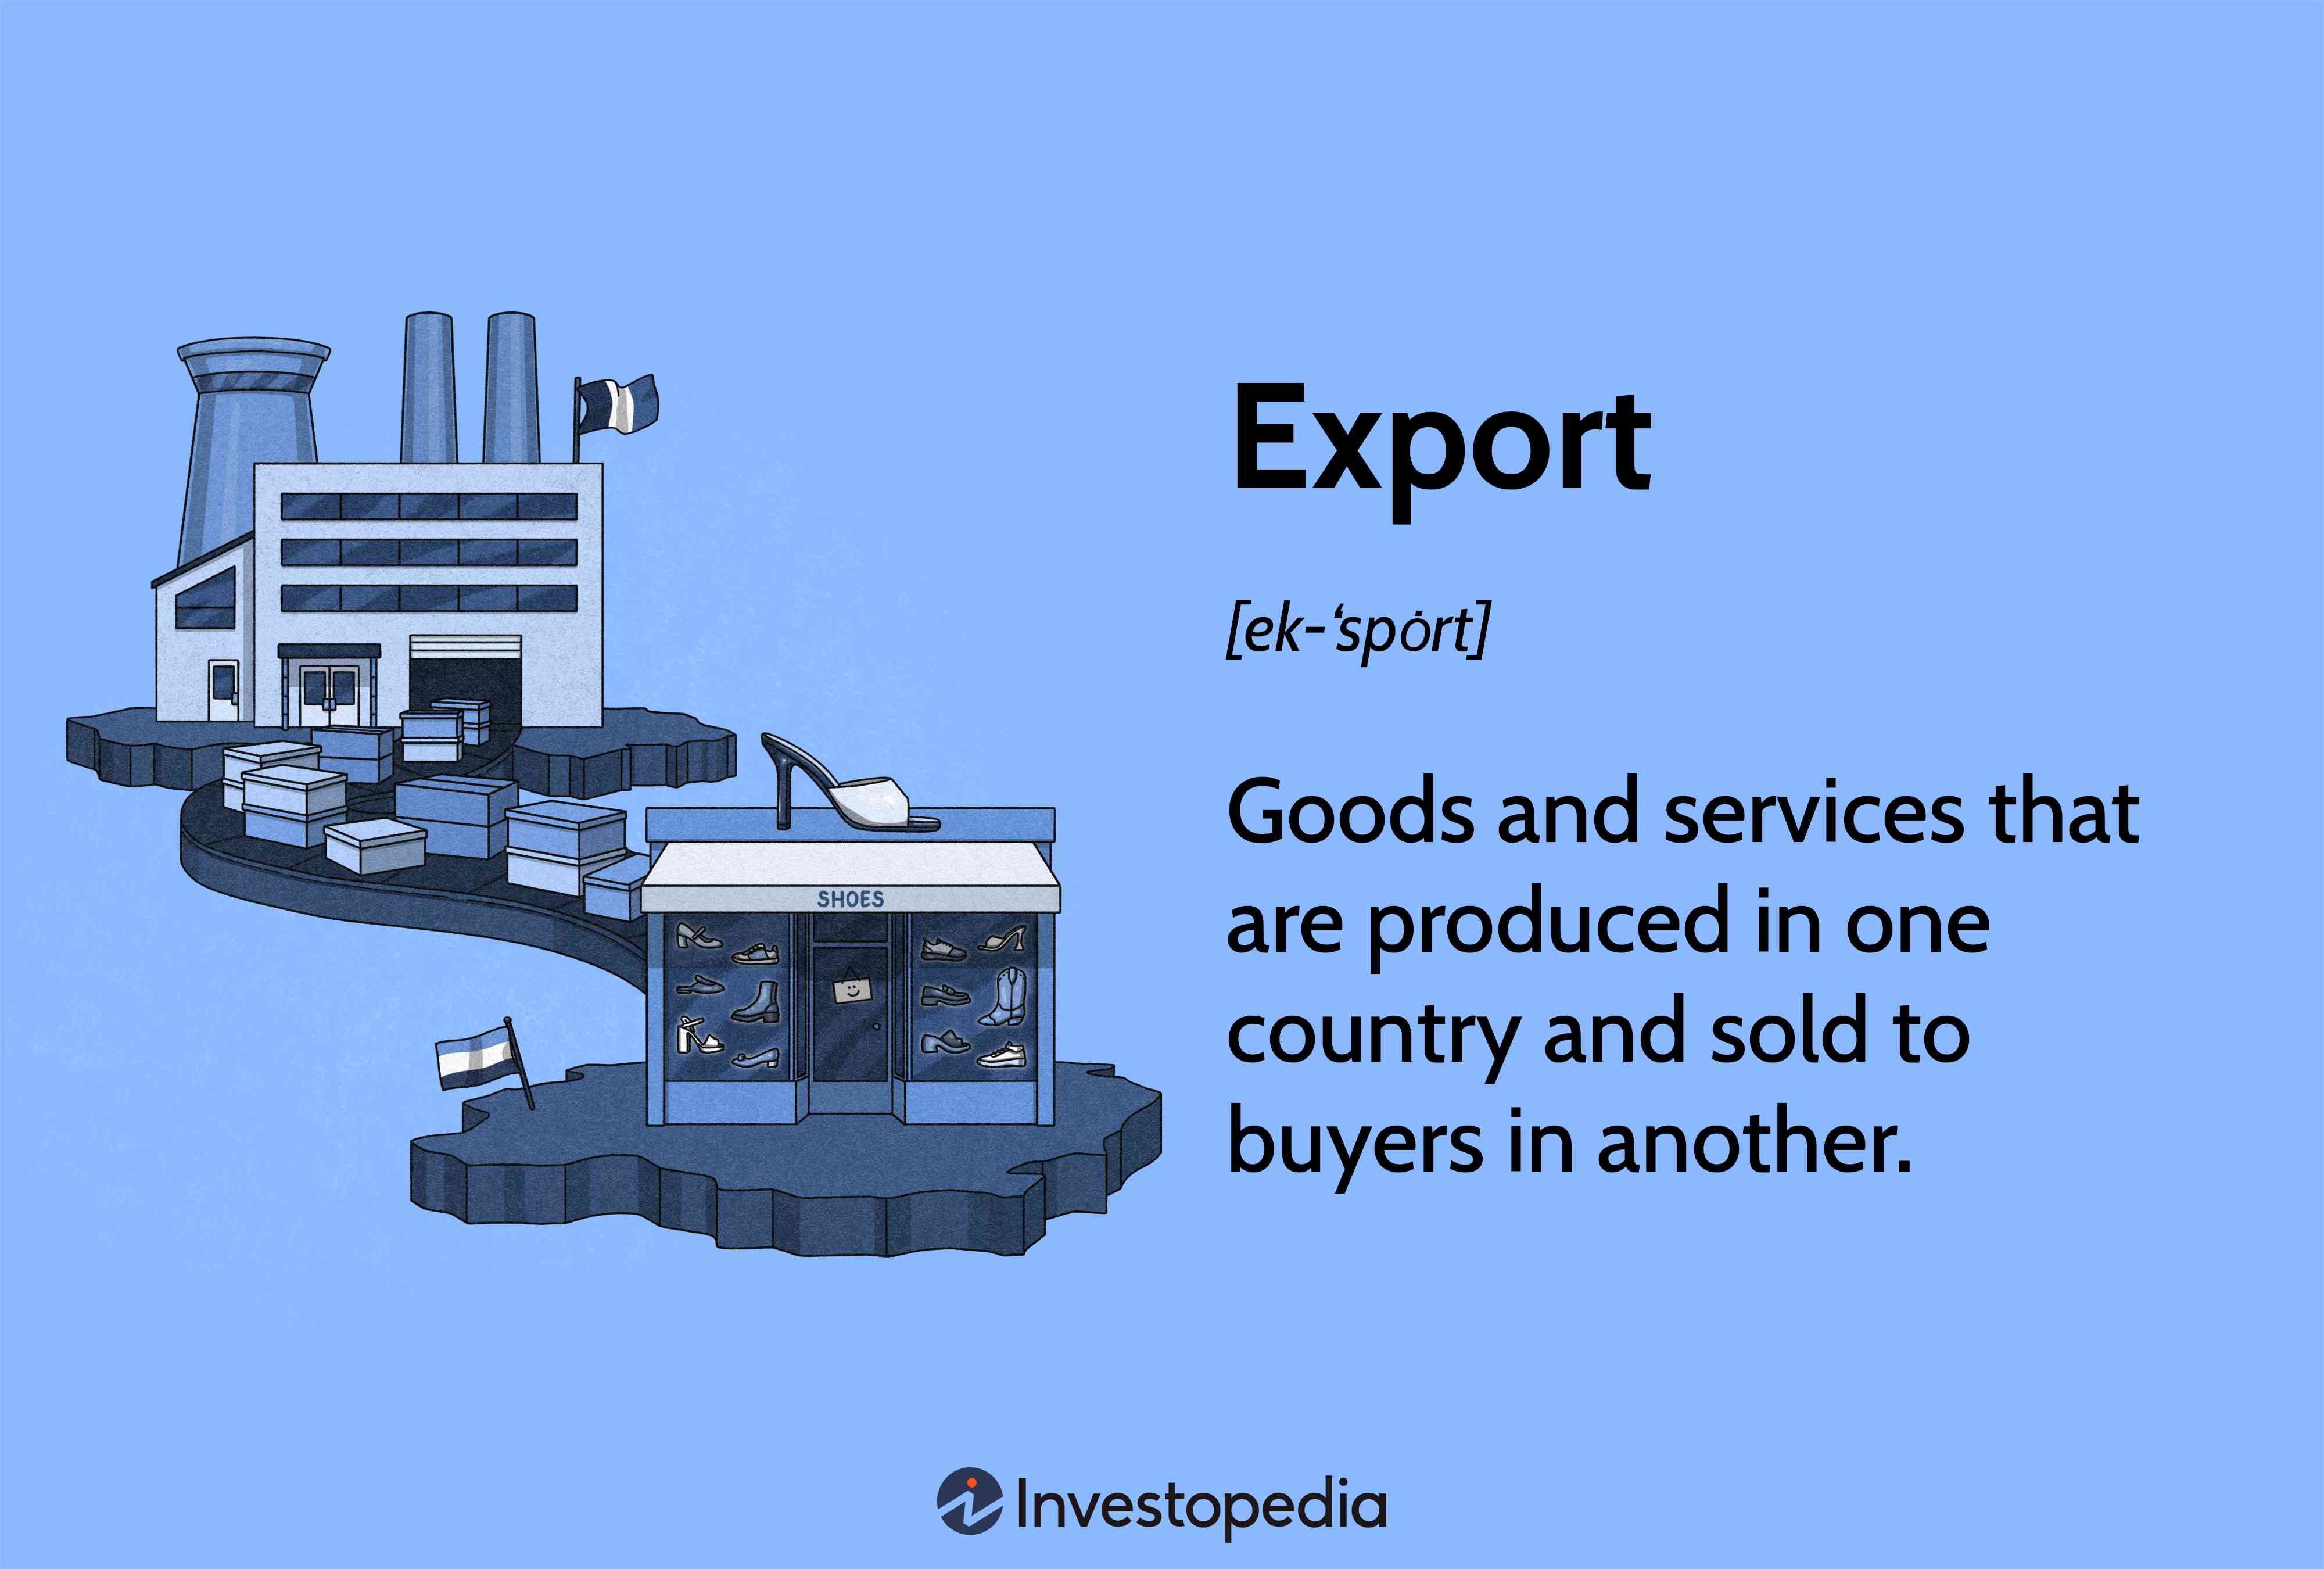 Export: Goods and services that are produced in one country and sold to buyers in another.